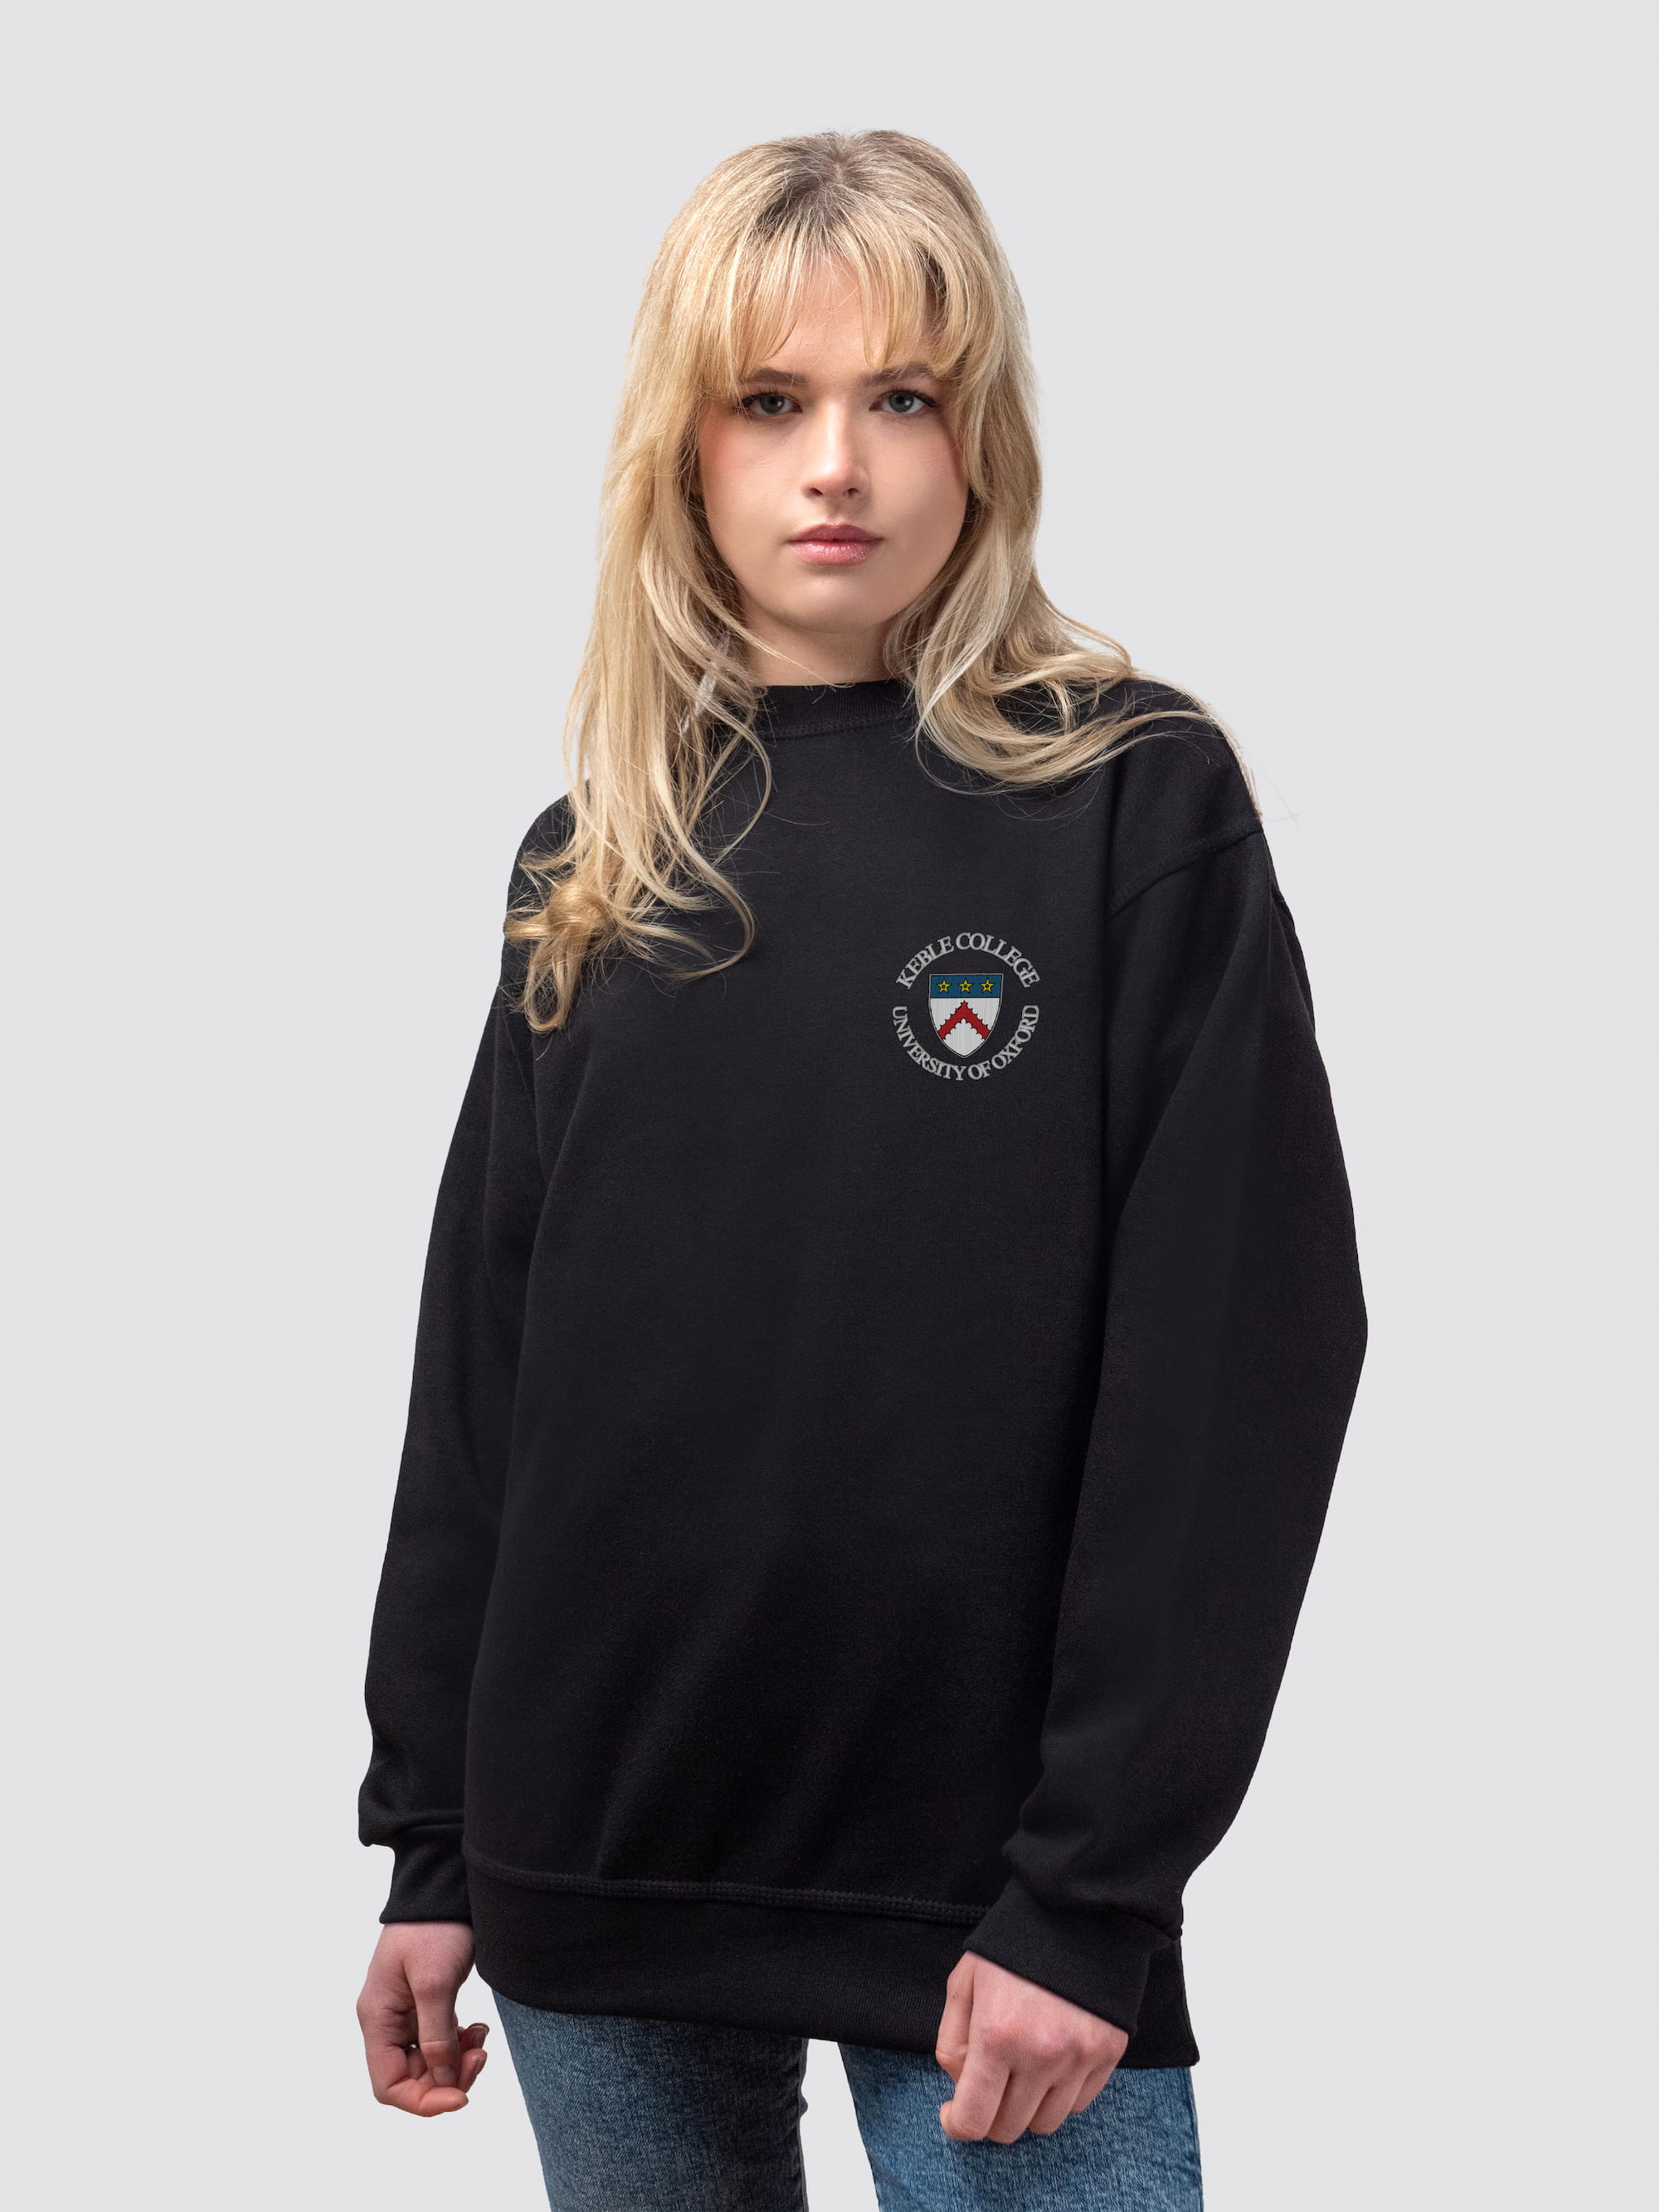 Keble crest on the front of a black, crew-neck sweatshirt